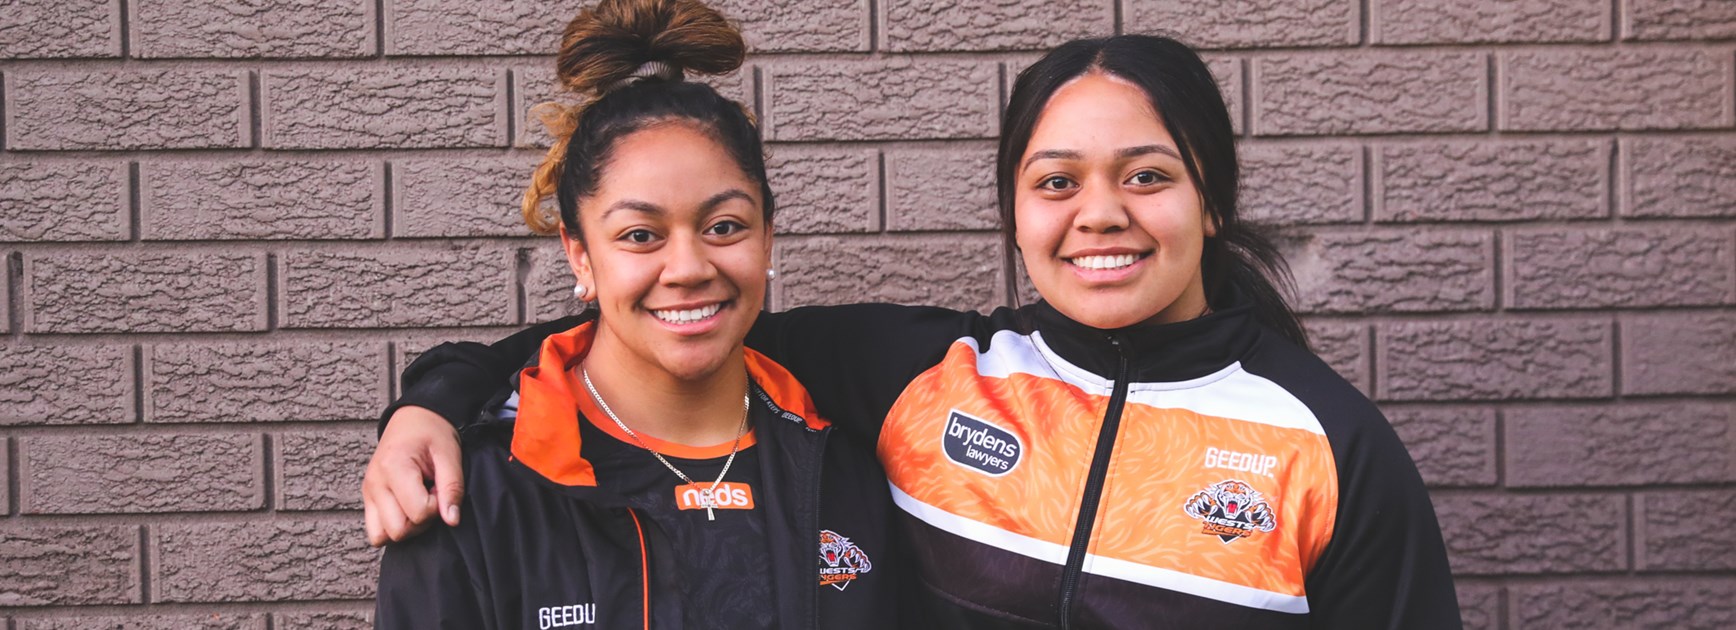 Hanisi sisters in for the love of rugby league